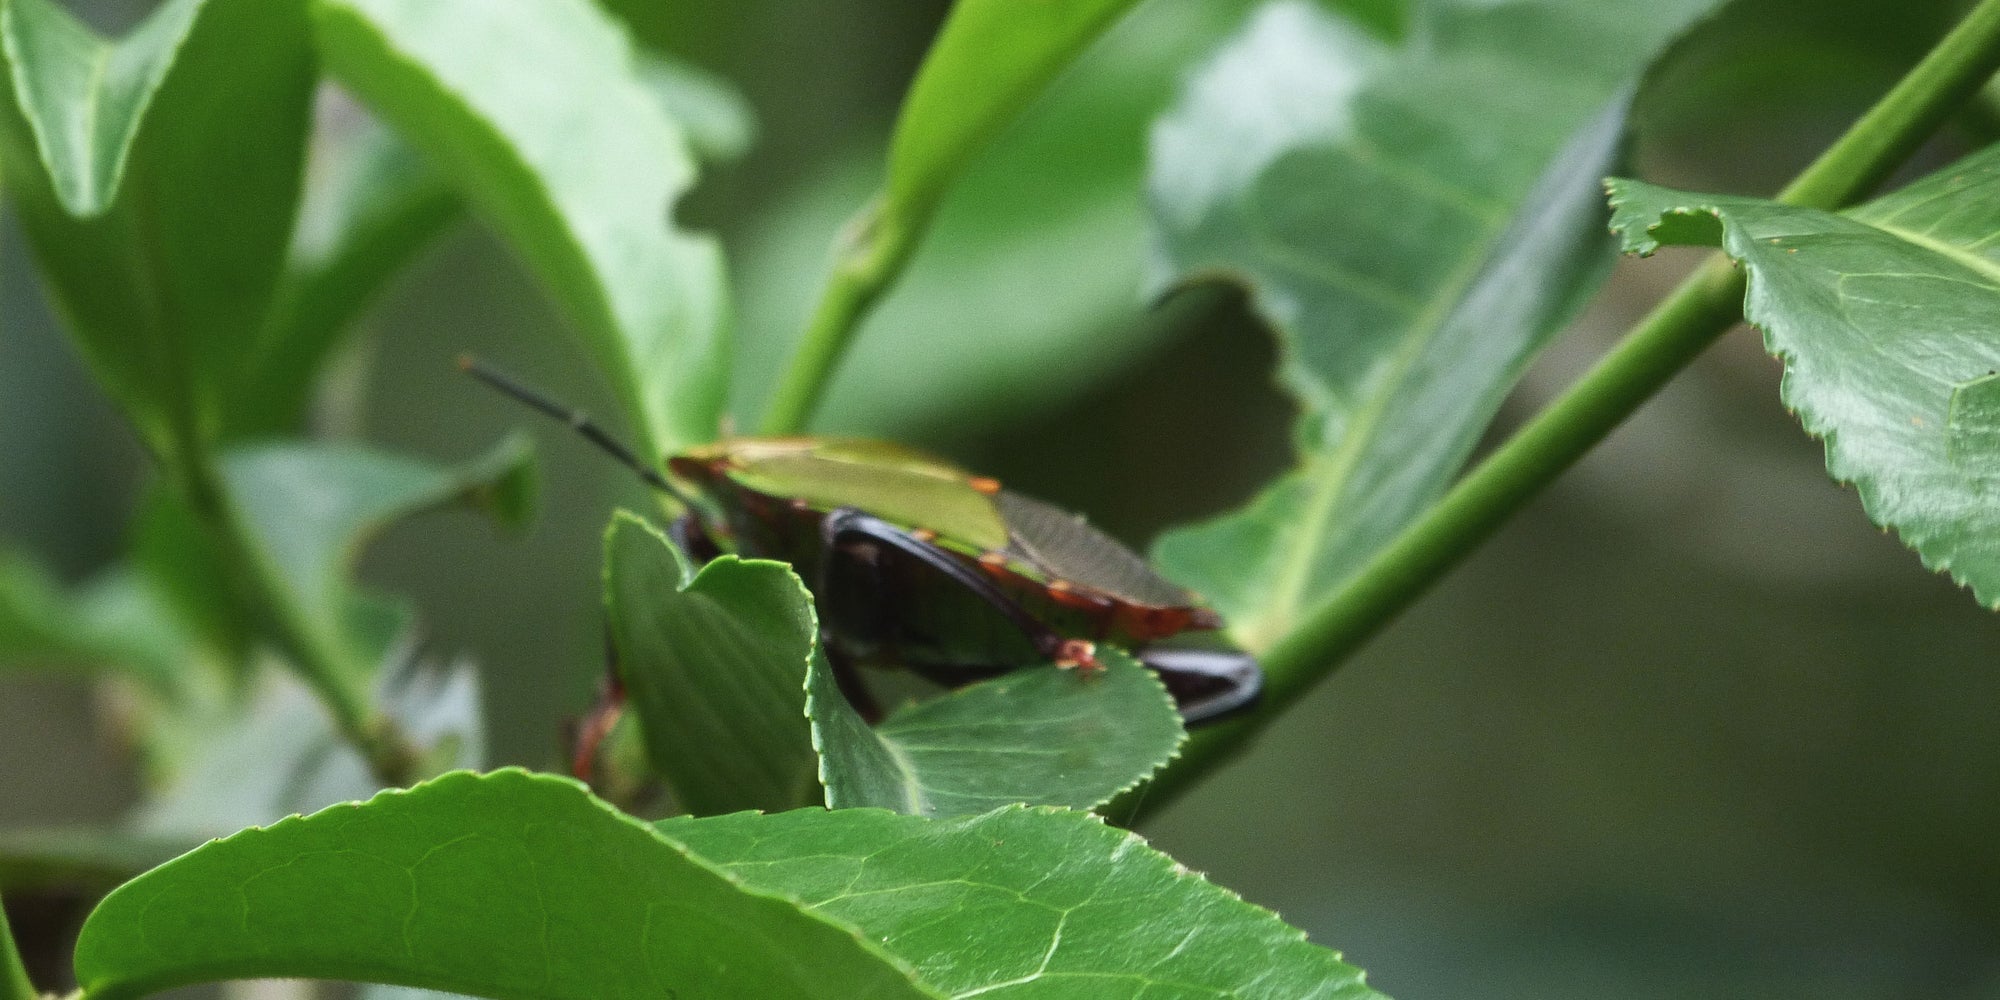 World Environment Day at PekoeTea - Image of an insect on a tea leaf